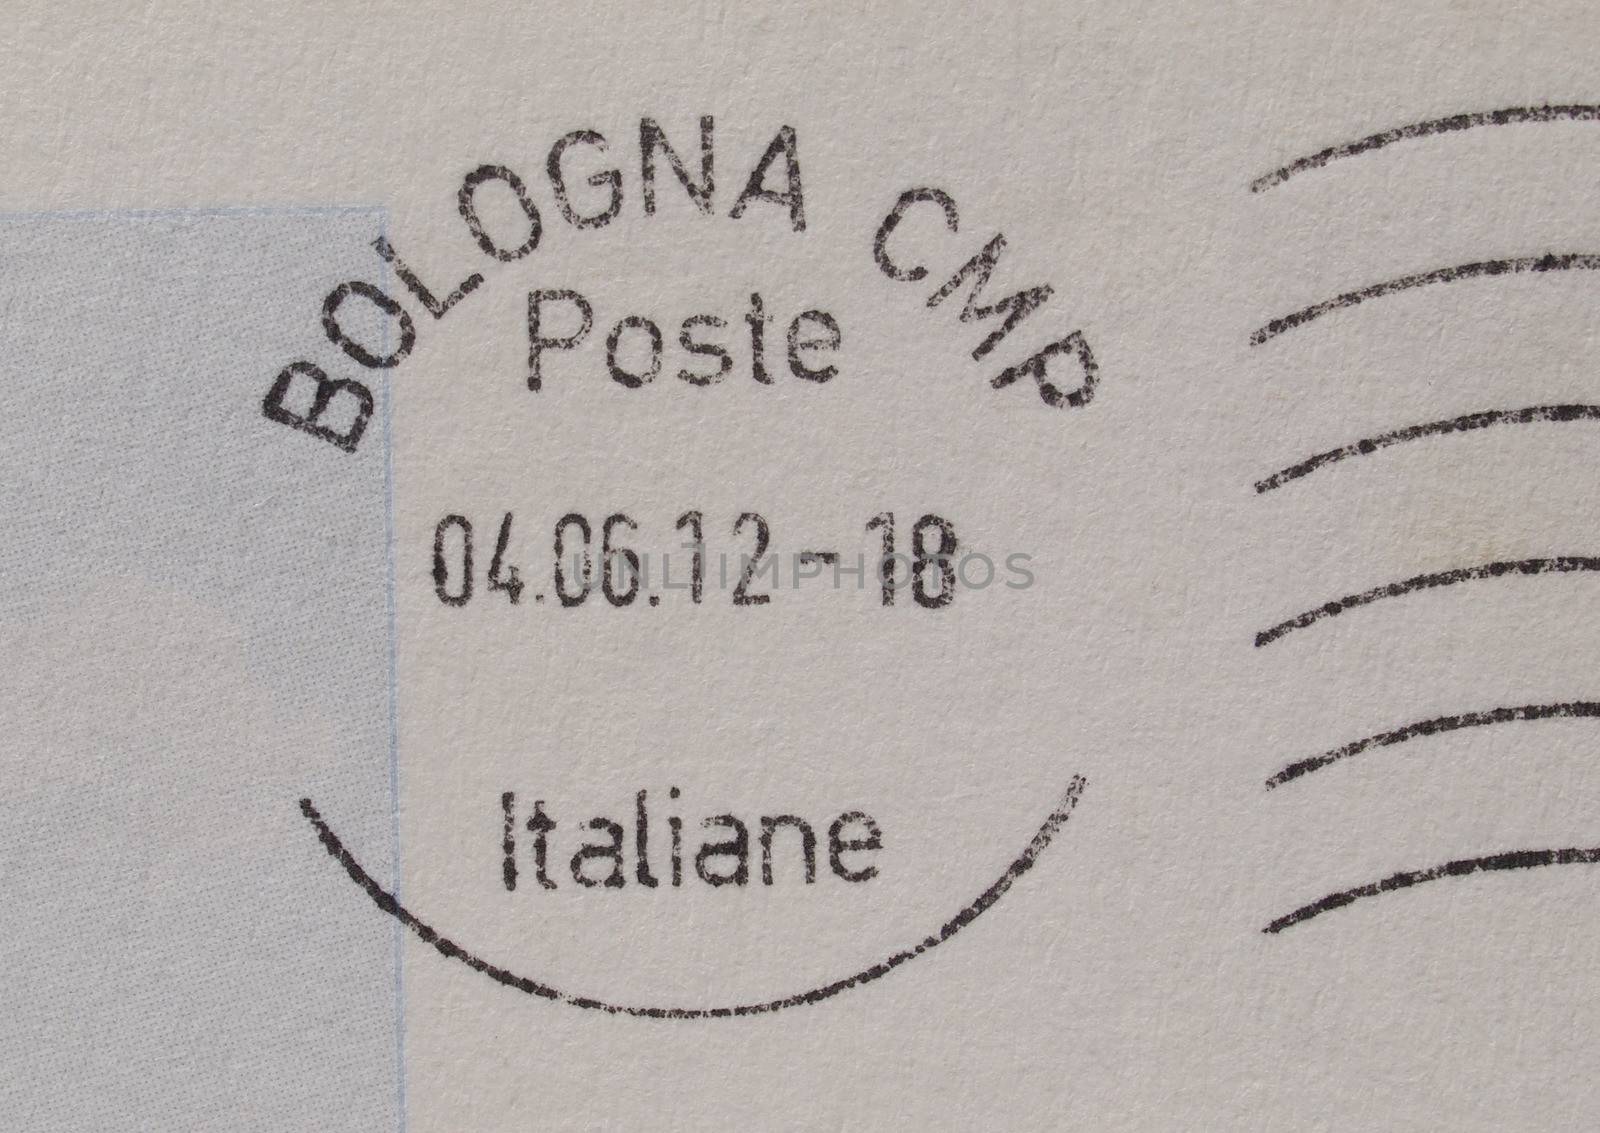 Postage meter from Brescia (Italy) printed with black ink over white paper